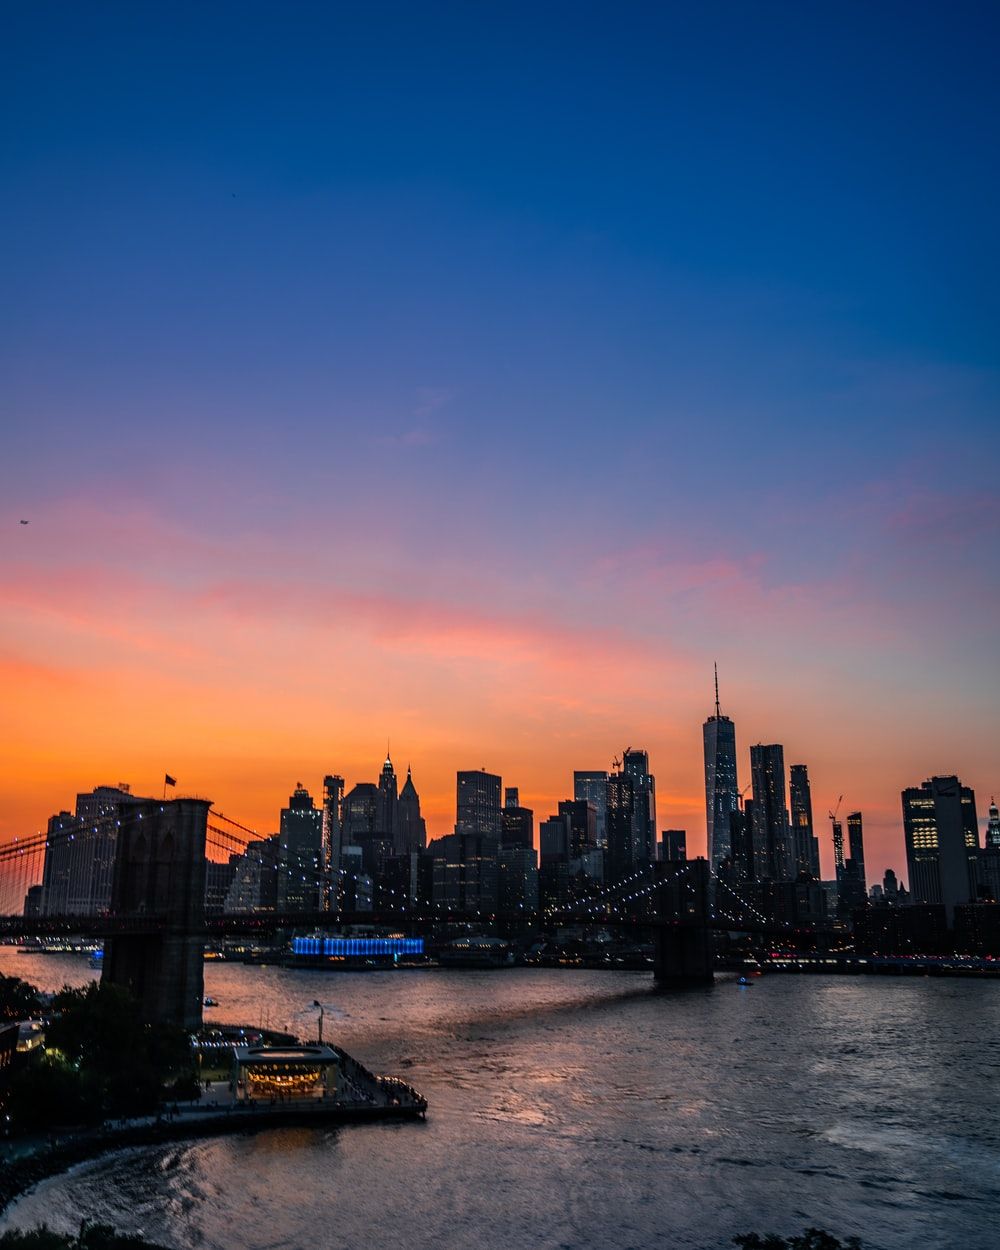 Best City Sunset Picture [HD]. Download Free Image